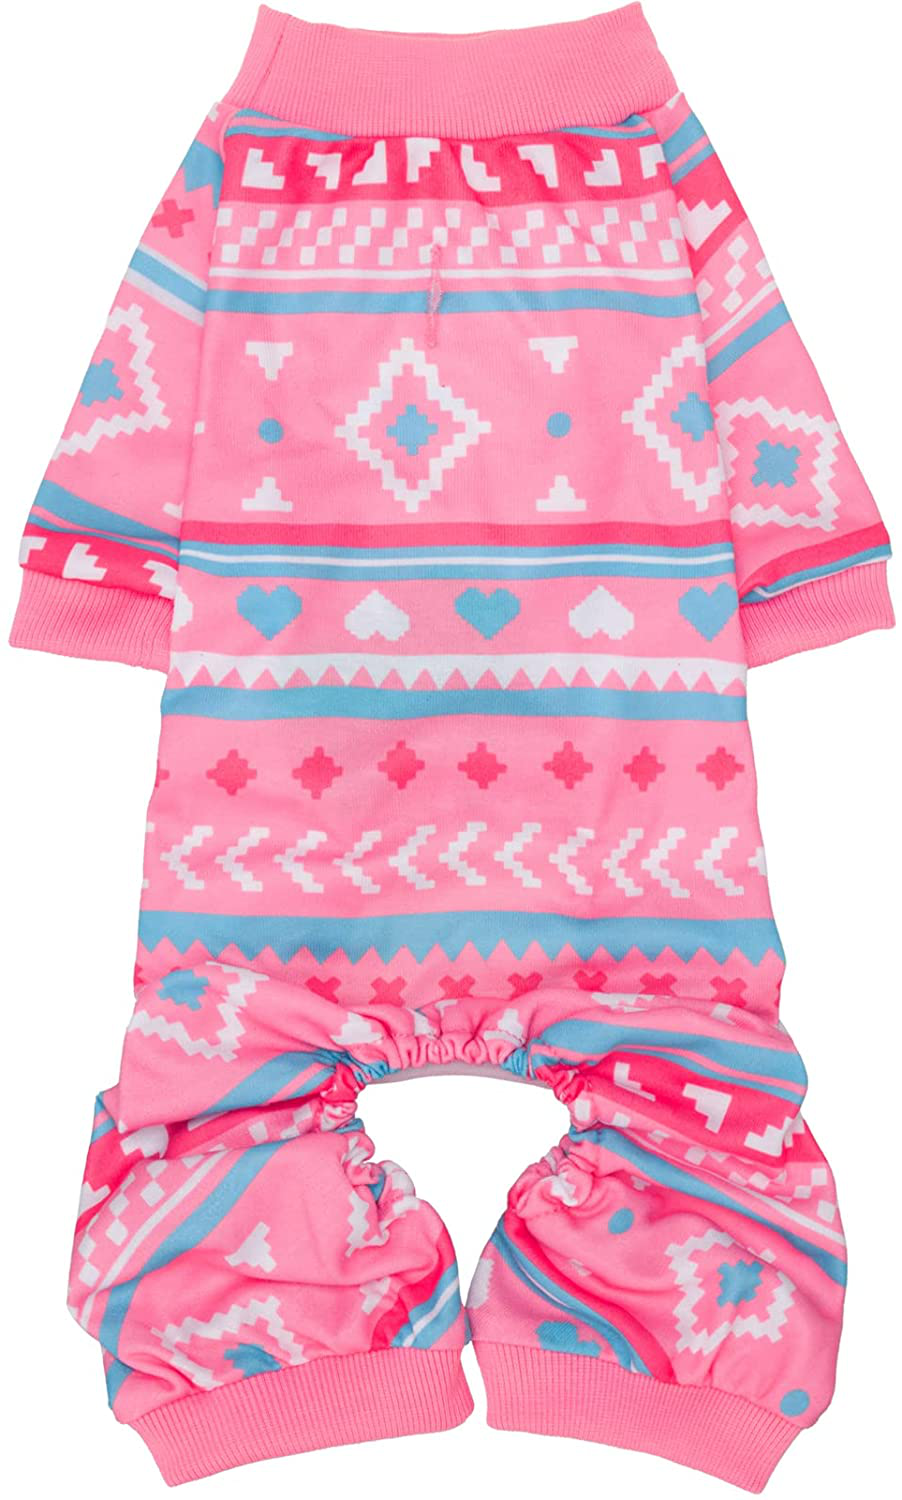 TAILGOO Light Breathable Dog Pajamas - Soft Apparel Jumpsuit, Fashionable Pet Clothes with Exquisite Geometric Patterns, Cute Puppy Pjs for Small or Kid Doggy Animals & Pet Supplies > Pet Supplies > Dog Supplies > Dog Apparel TAILGOO Pink Large 